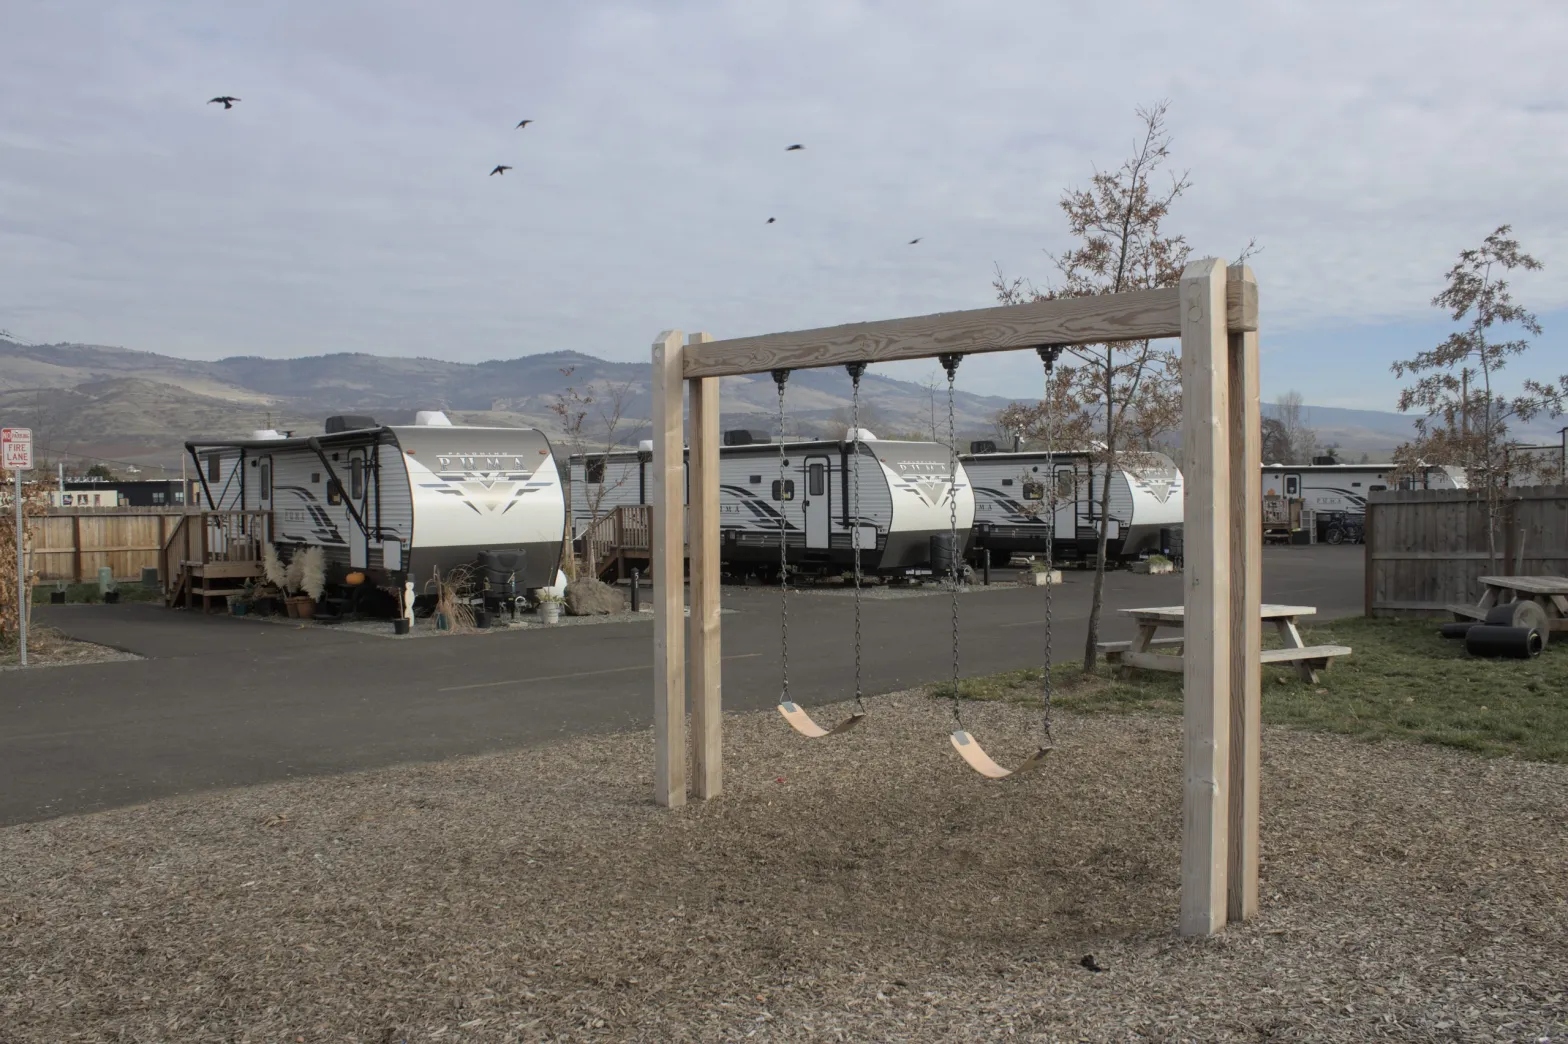 An empty swing sets sits in front of a group of trailers.